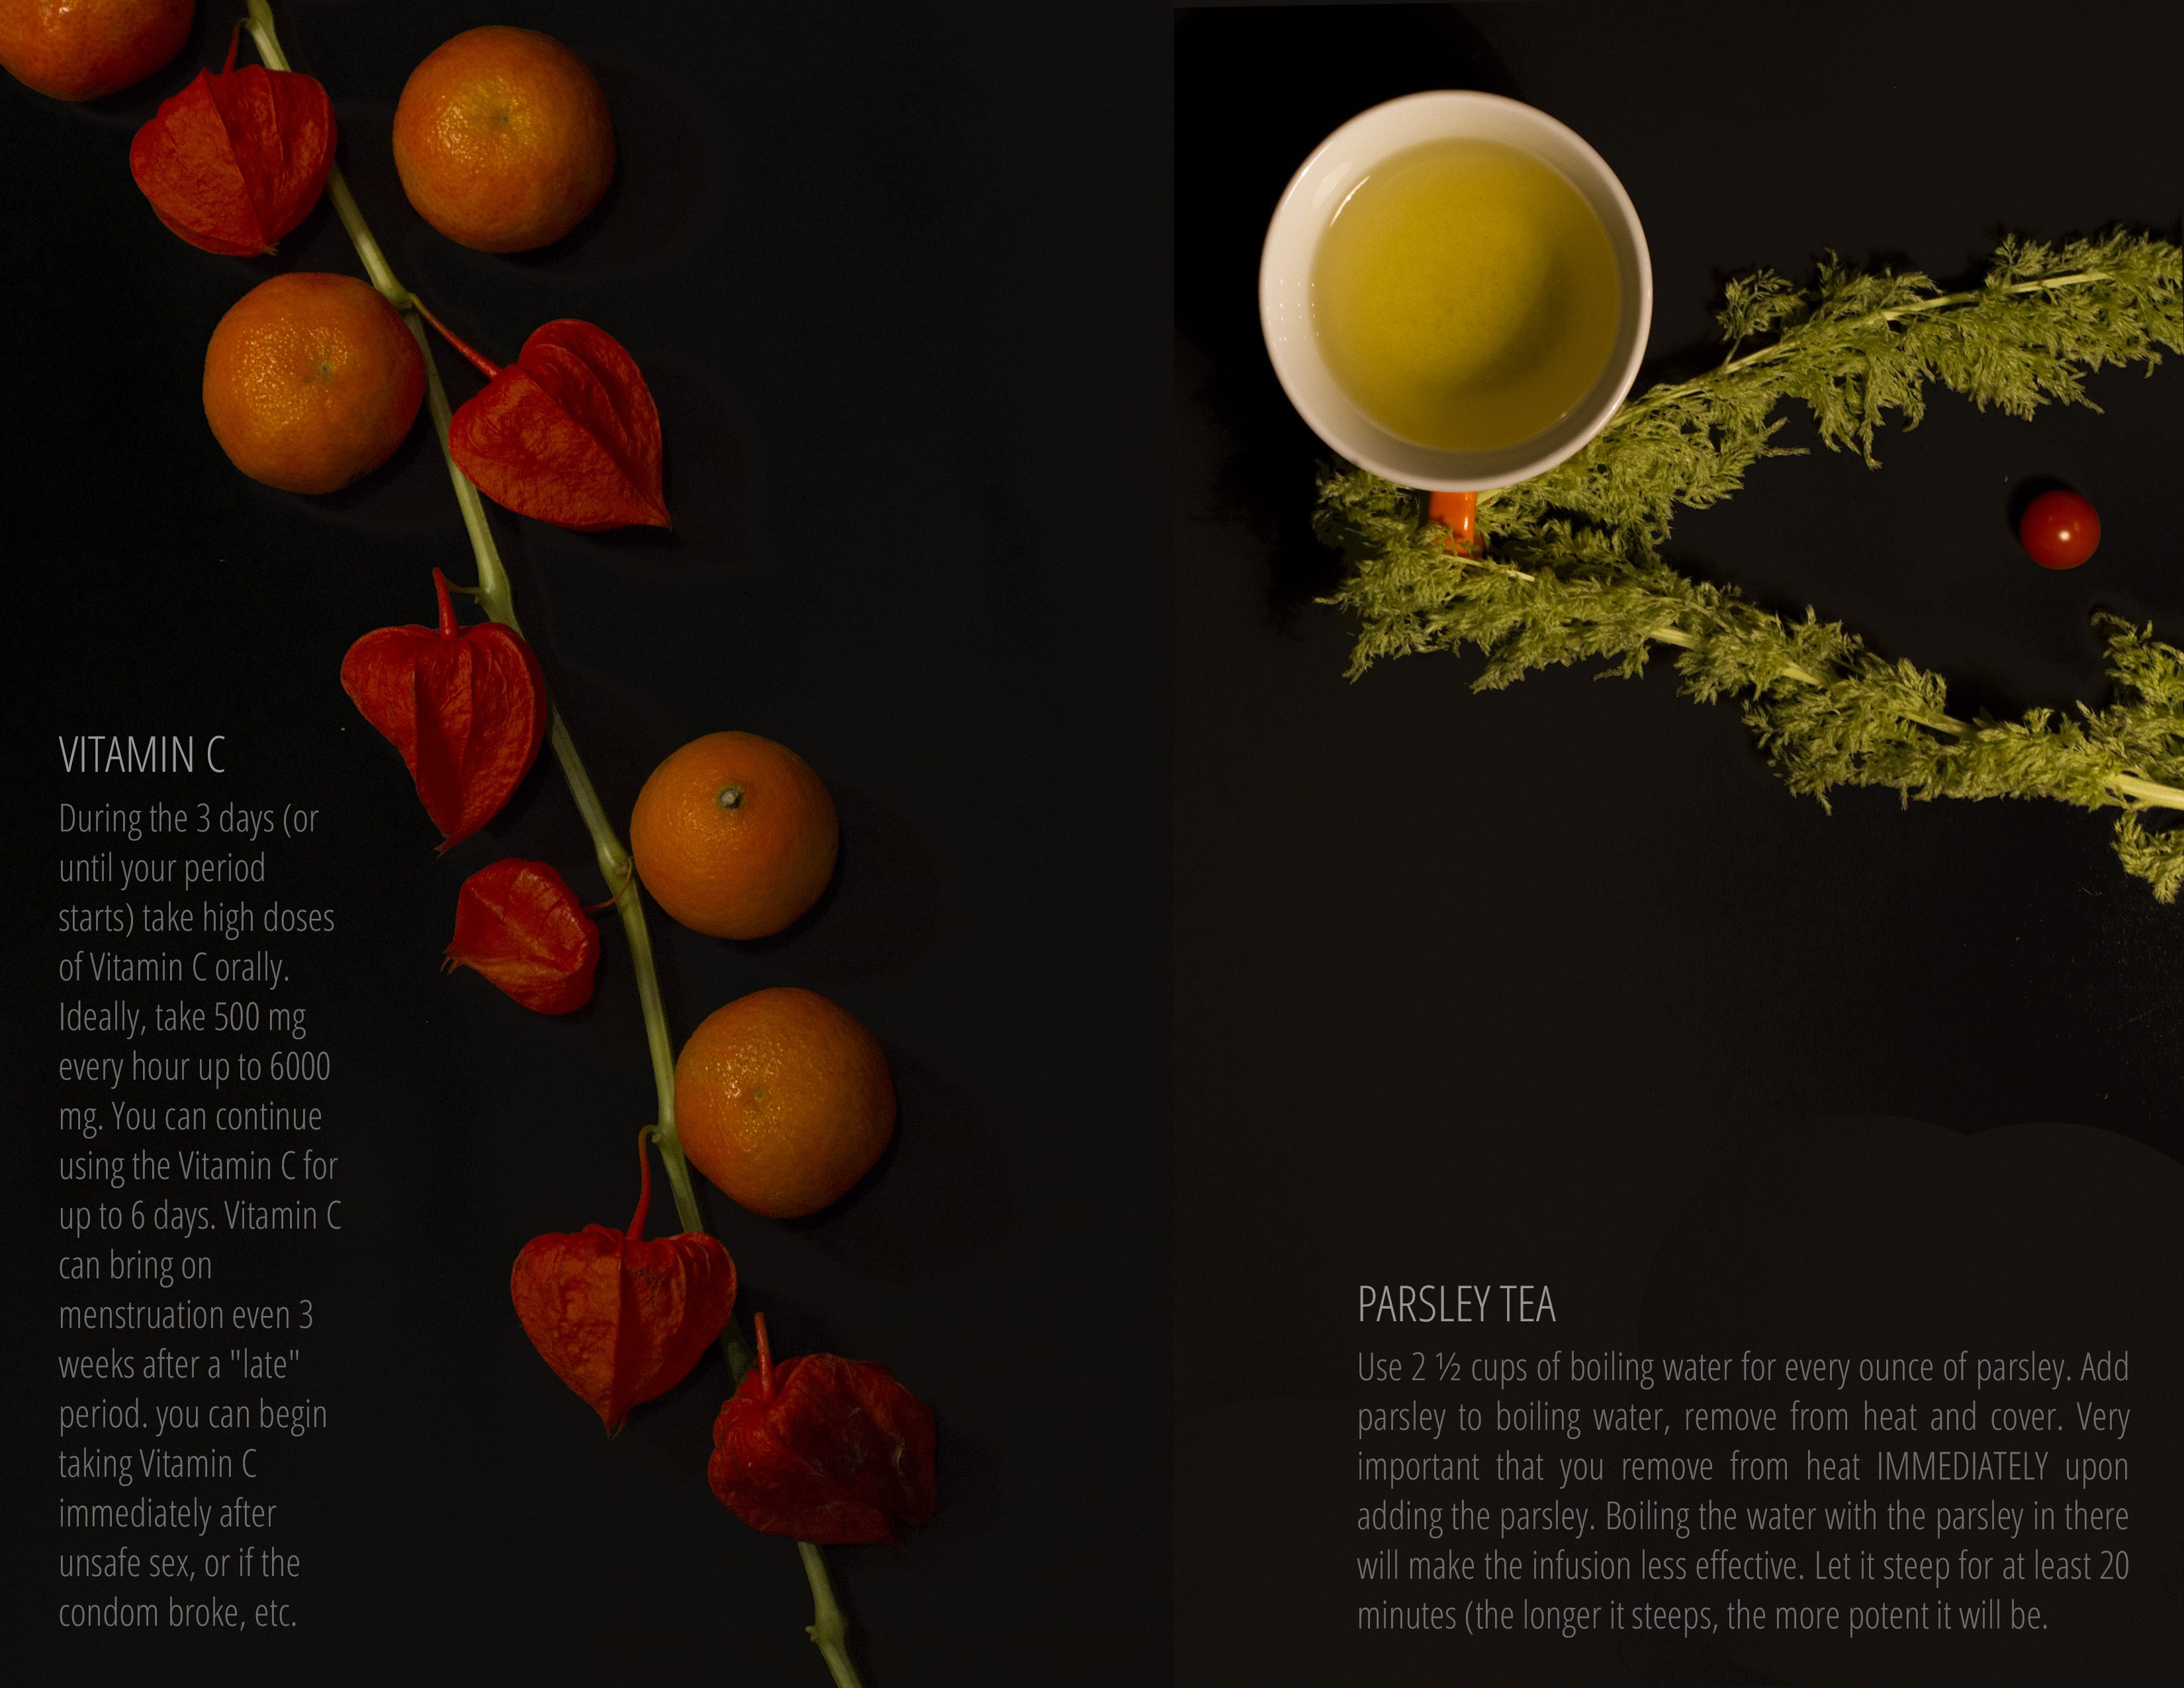 On the left is the text: Vitamin C. Next to the text is a single chinese lantern flower stem with clementines placed alongside the flowers. To the right, is a cup of tea with a green sprig running through the cup handle. There is text below the teacup, which reads: Parsley Tea.